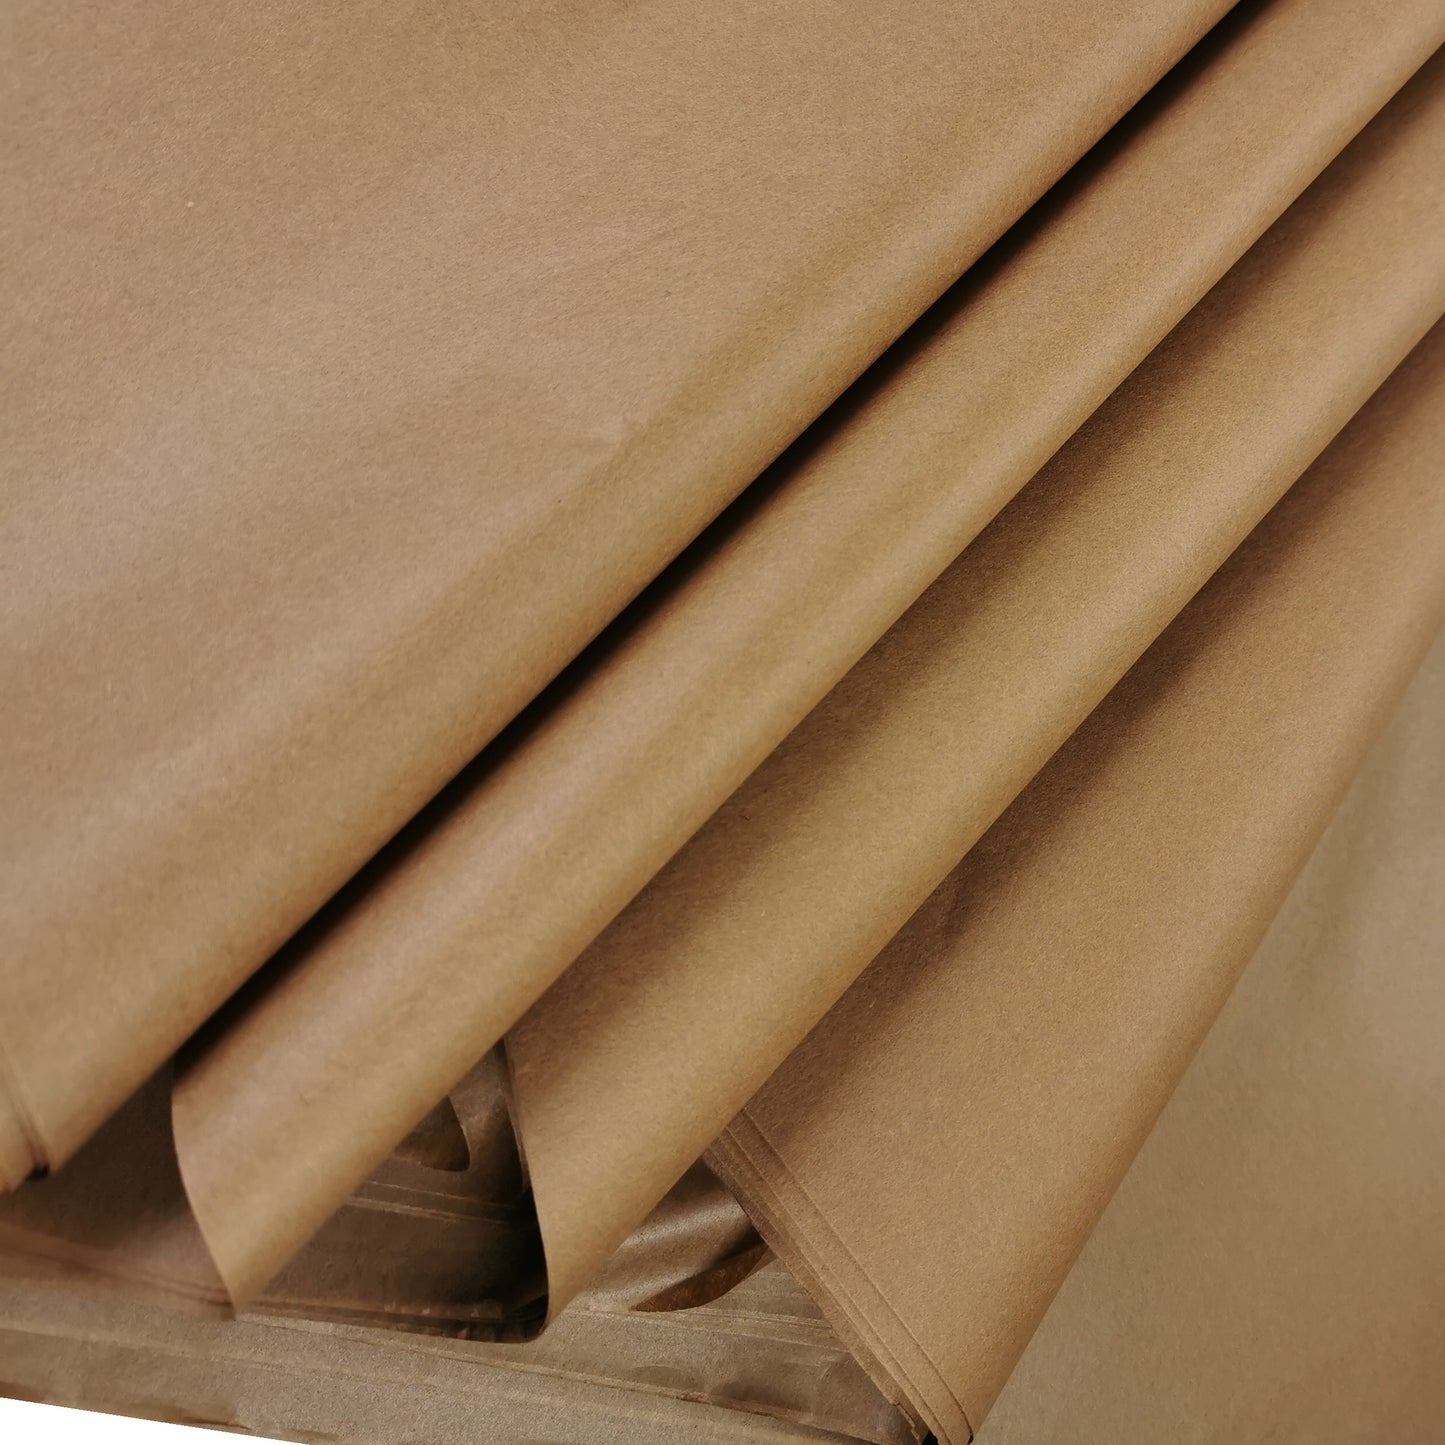 Tissue Paper Sheets 50cm x 75cm 17gsm Chocolate Brown